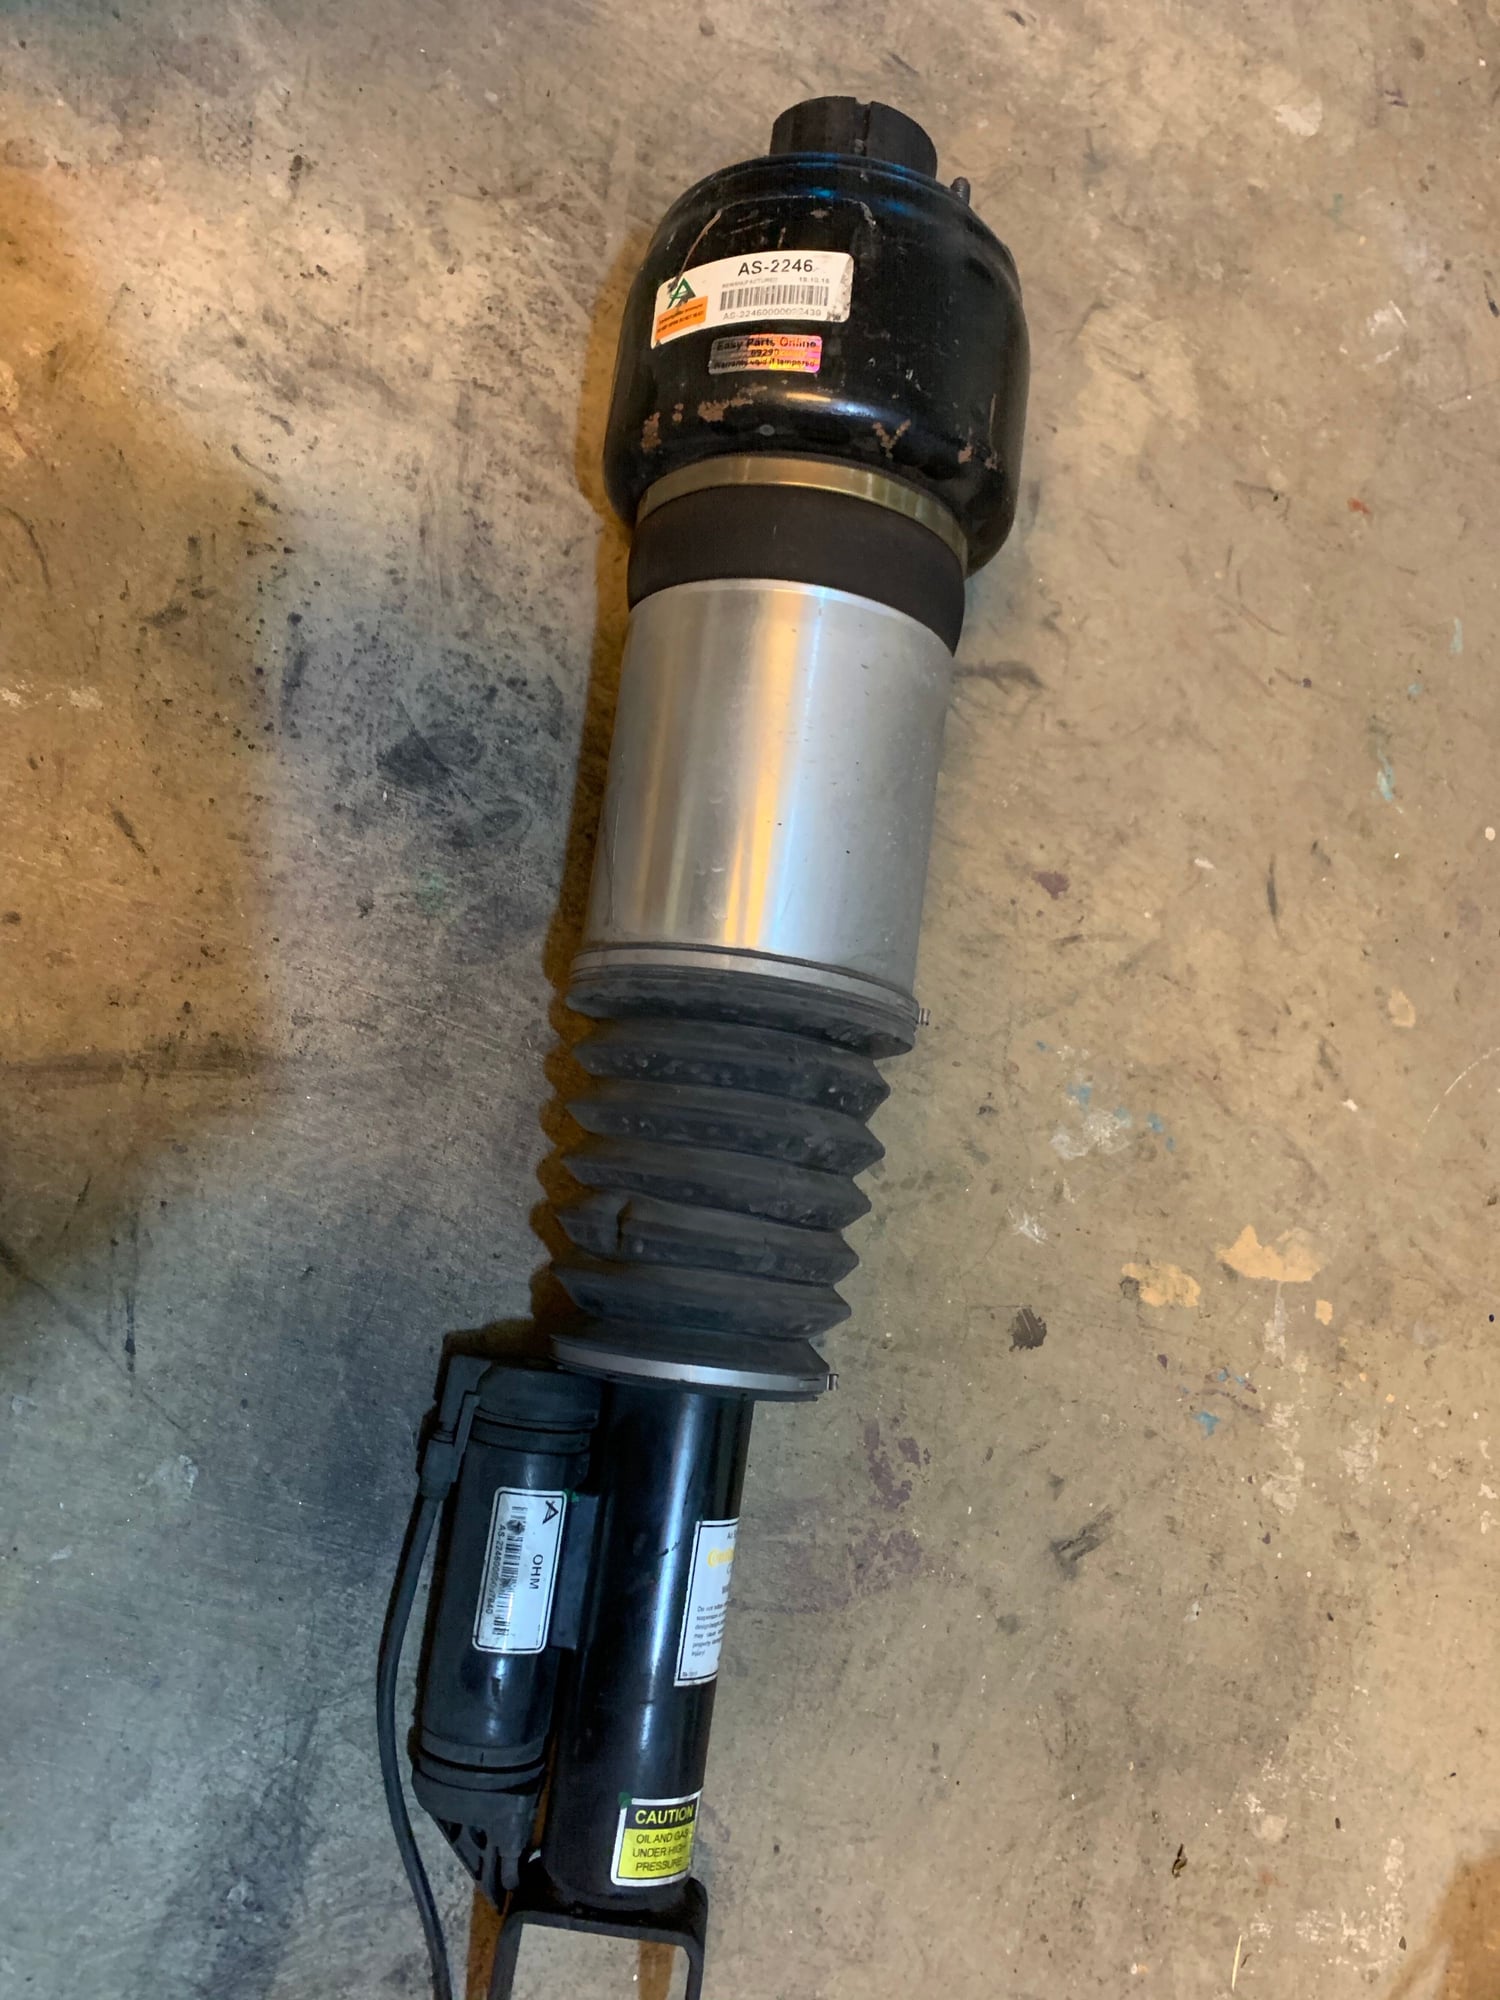 Steering/Suspension - E500 W211 front right airmatic Arnott shock - Used - 2003 to 2006 Mercedes-Benz E500 - Austin, TX 78729, United States